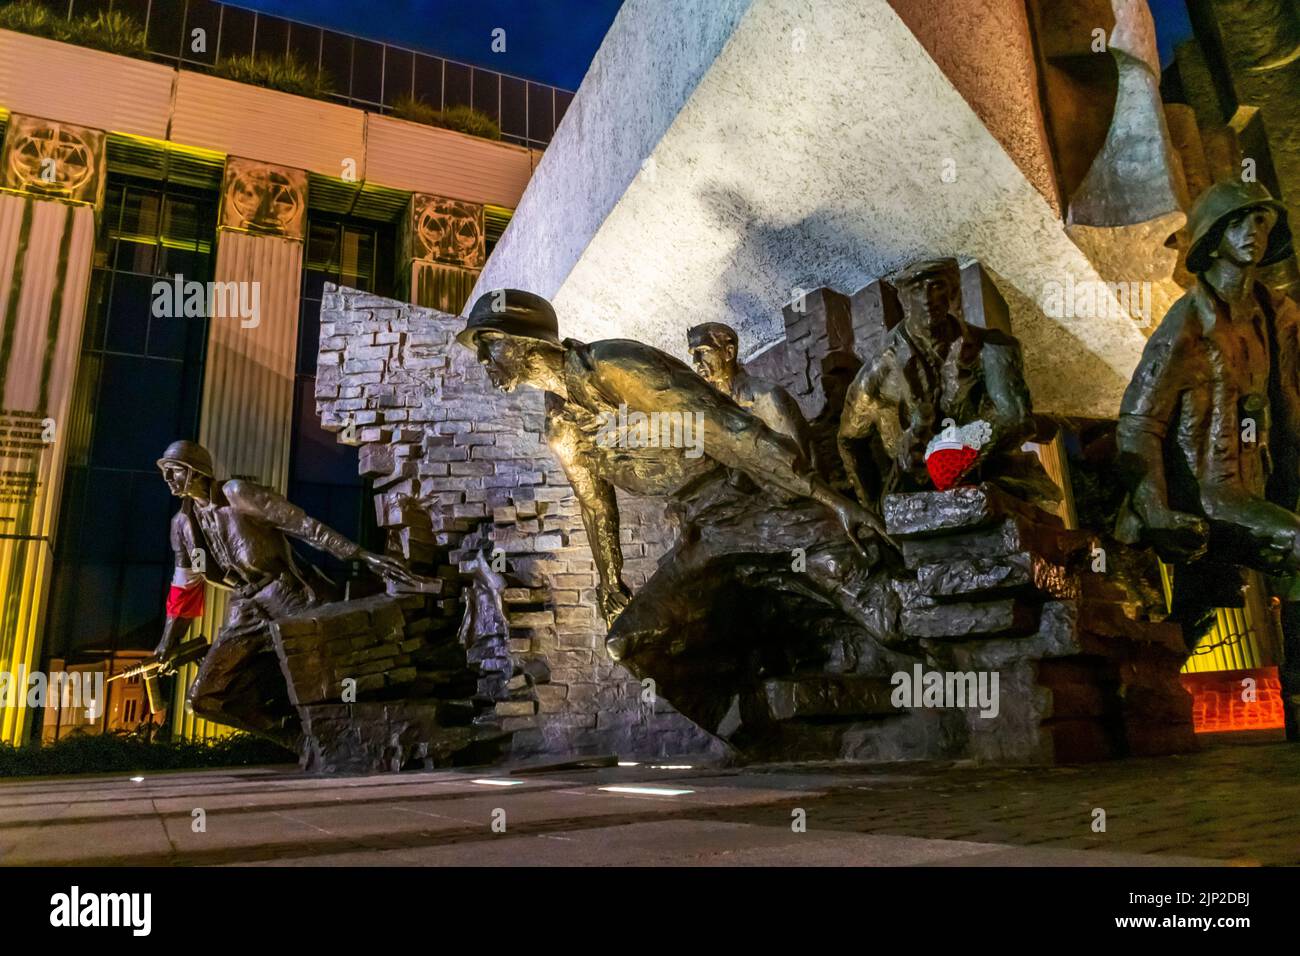 Warsaw, Poland, Warsaw Ghetto Uprising Monument, Public Sculpture at Night, Credit Artist: Nathan Rapoport Stock Photo